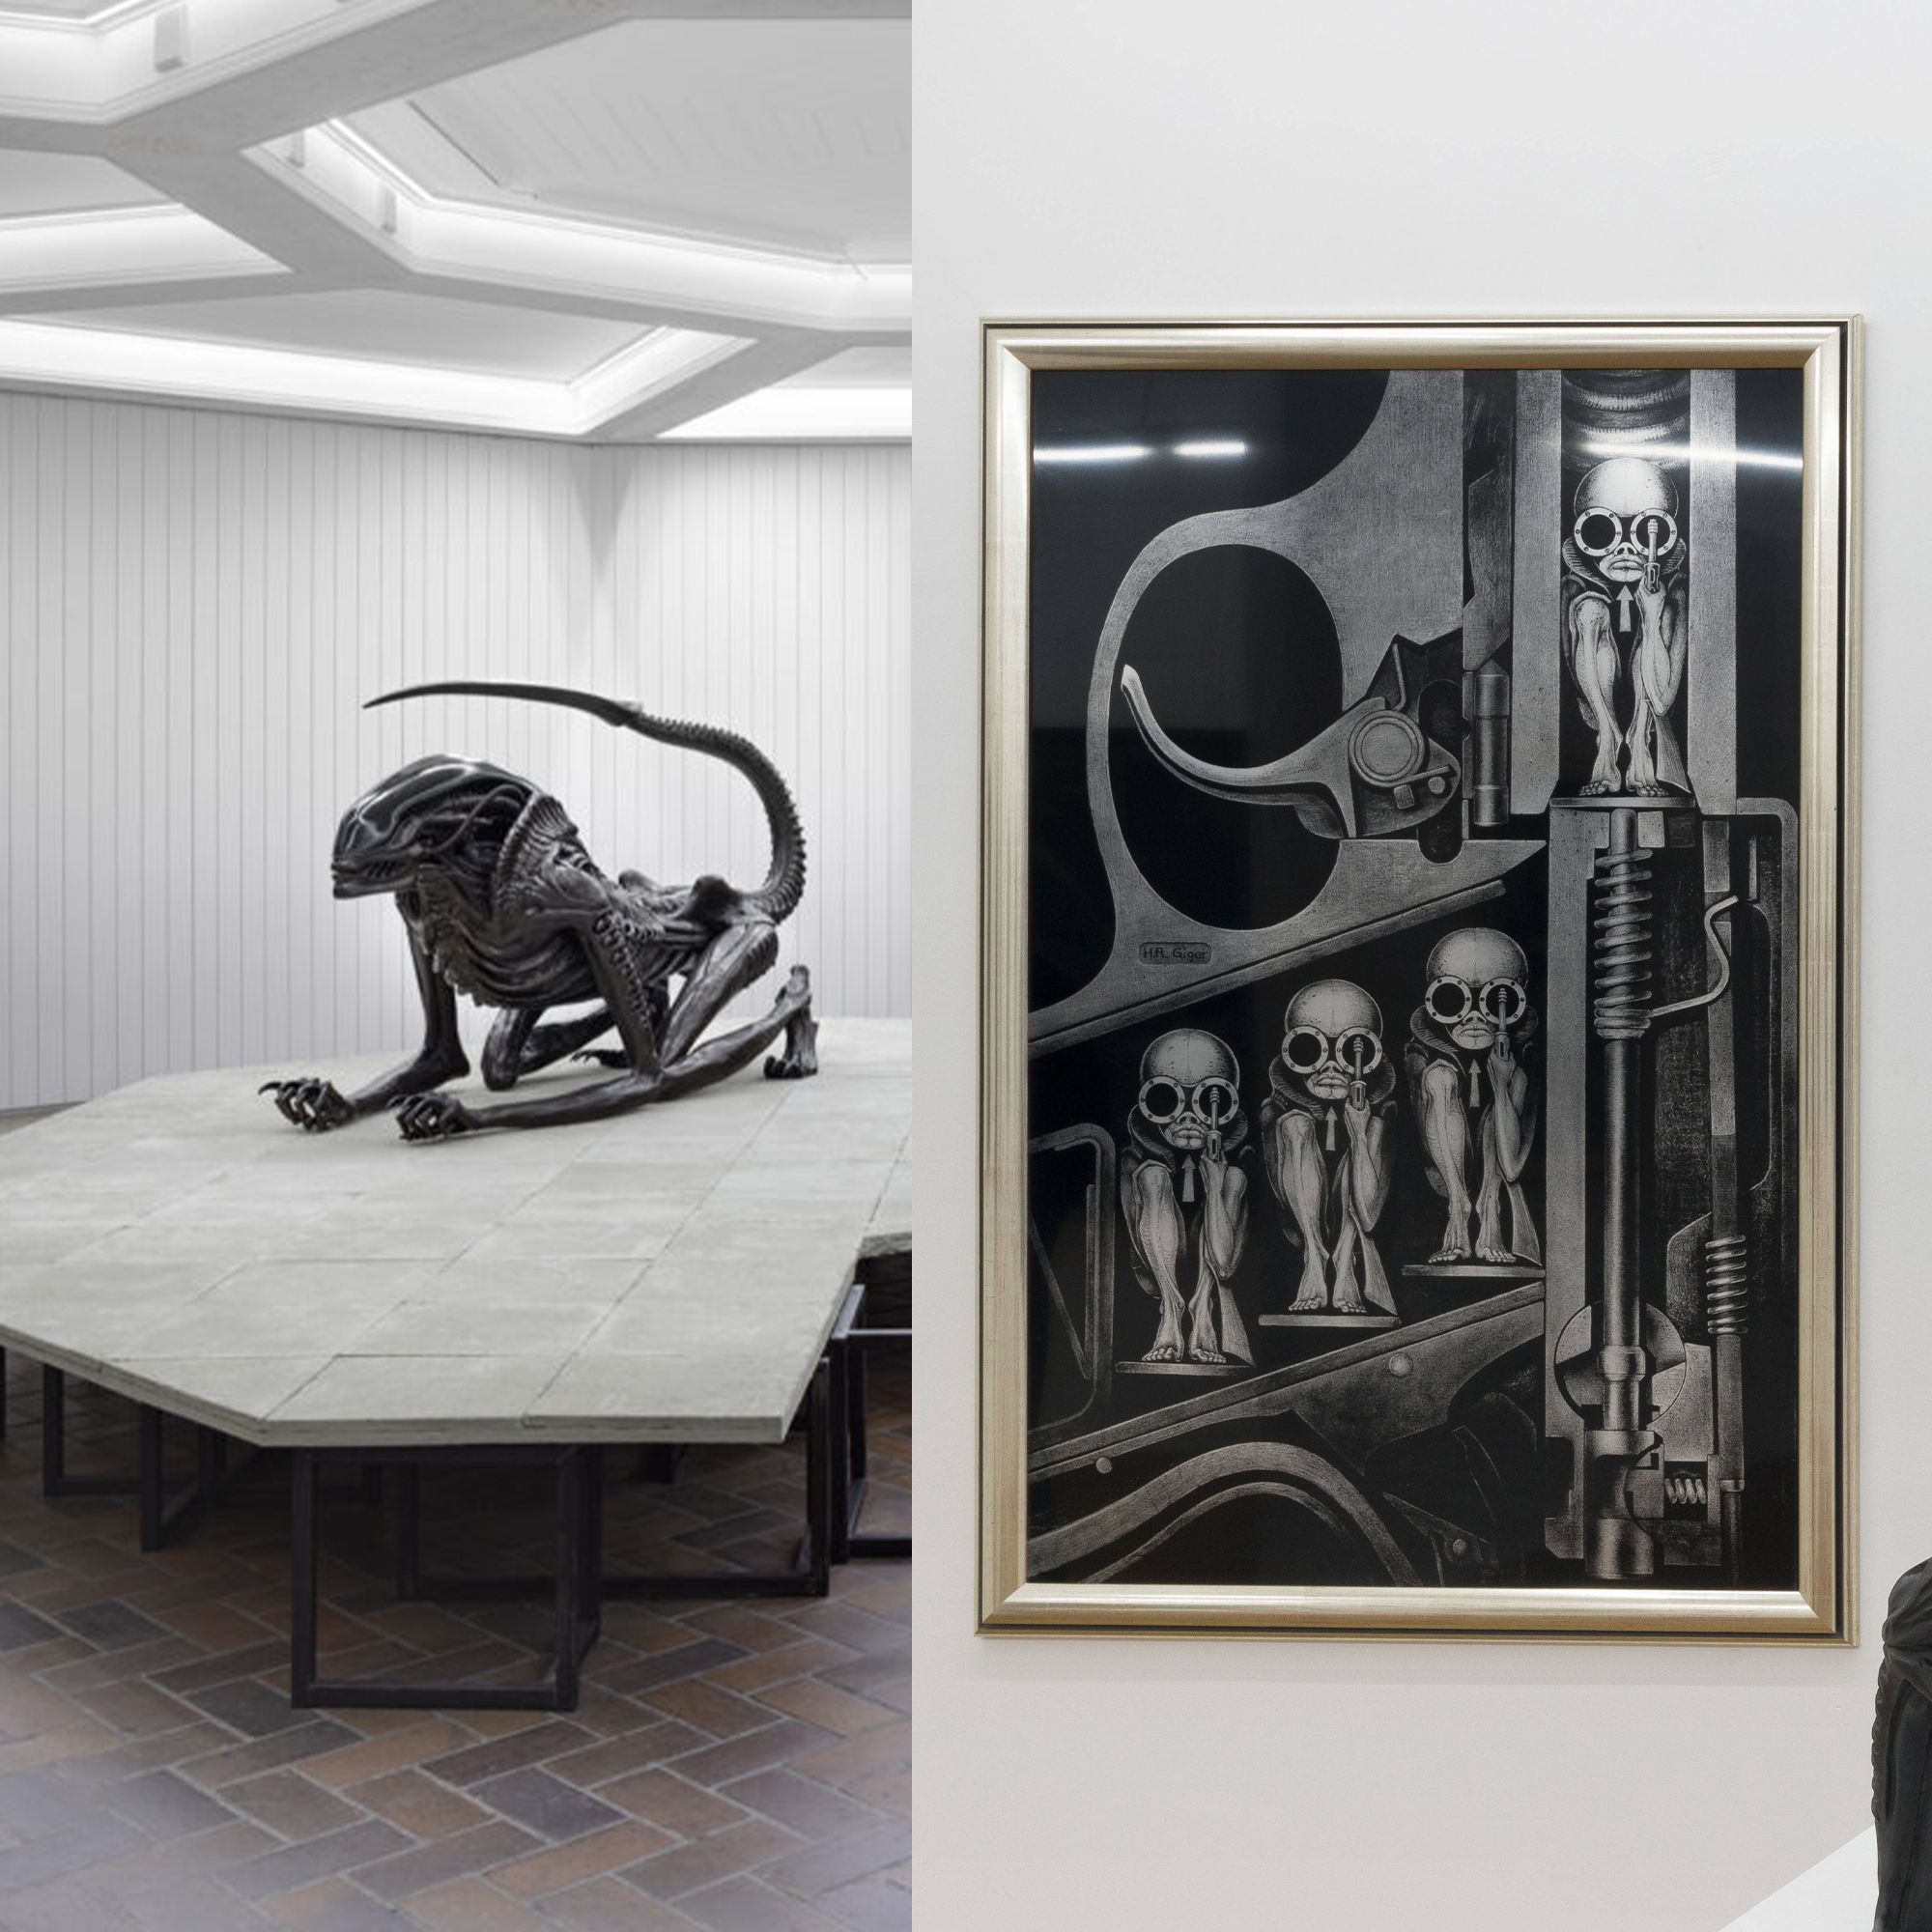 Xenomorph sculpture installed in an art gallery on left, on right a framed illustration by H.R. Giger